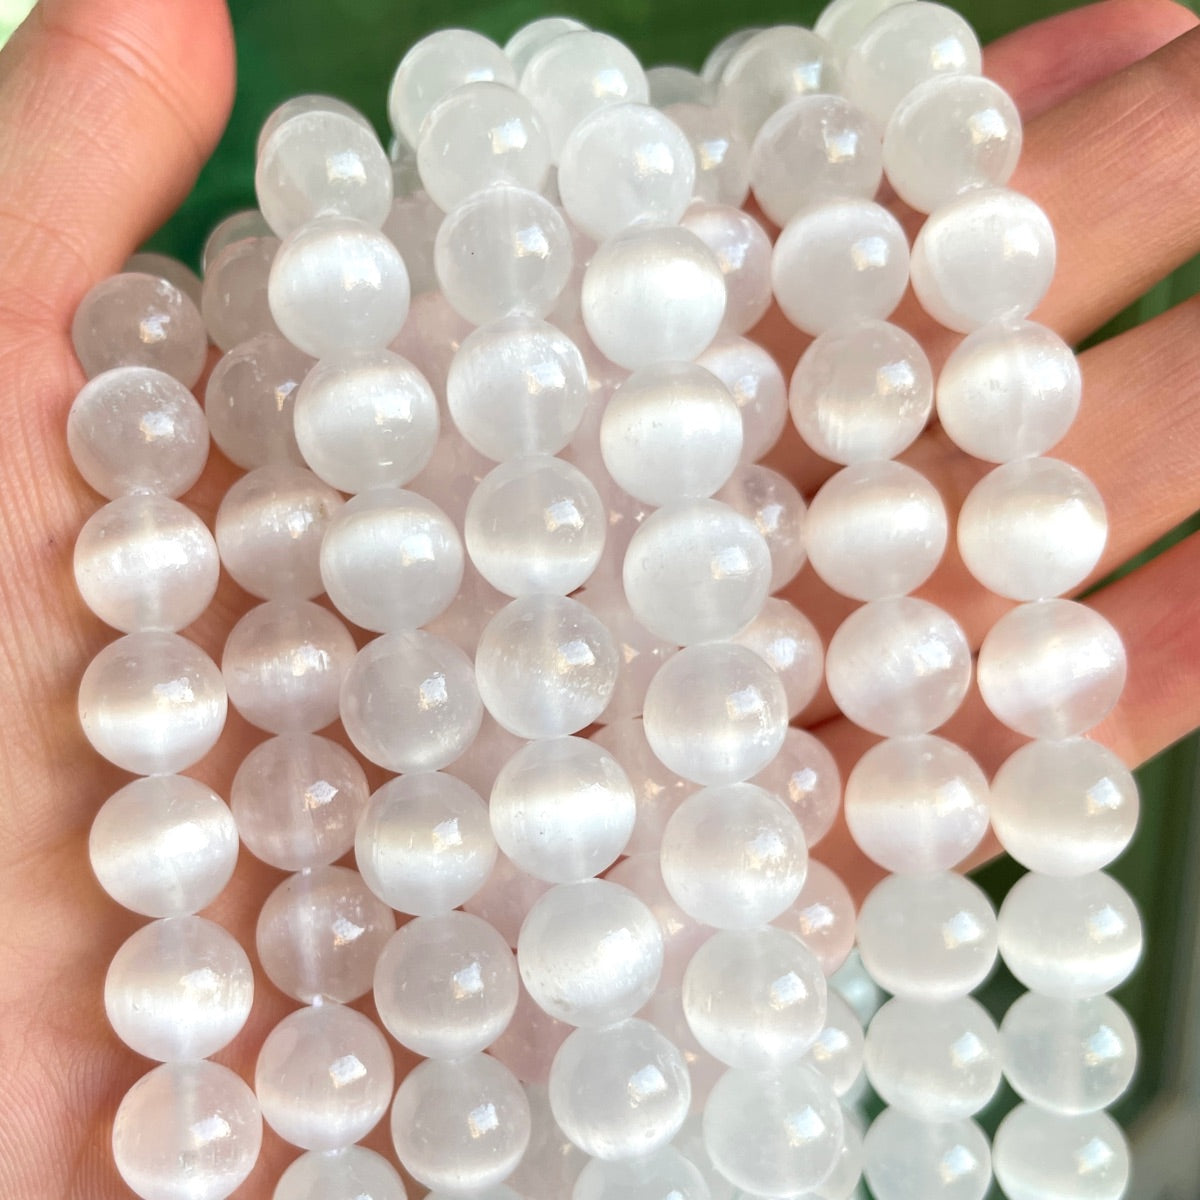 2 Strands/lot 8/10/12mm White Selenite Smooth Beads Stone Beads 12mm Stone Beads 8mm Stone Beads New Beads Arrivals Selenite Beads Charms Beads Beyond